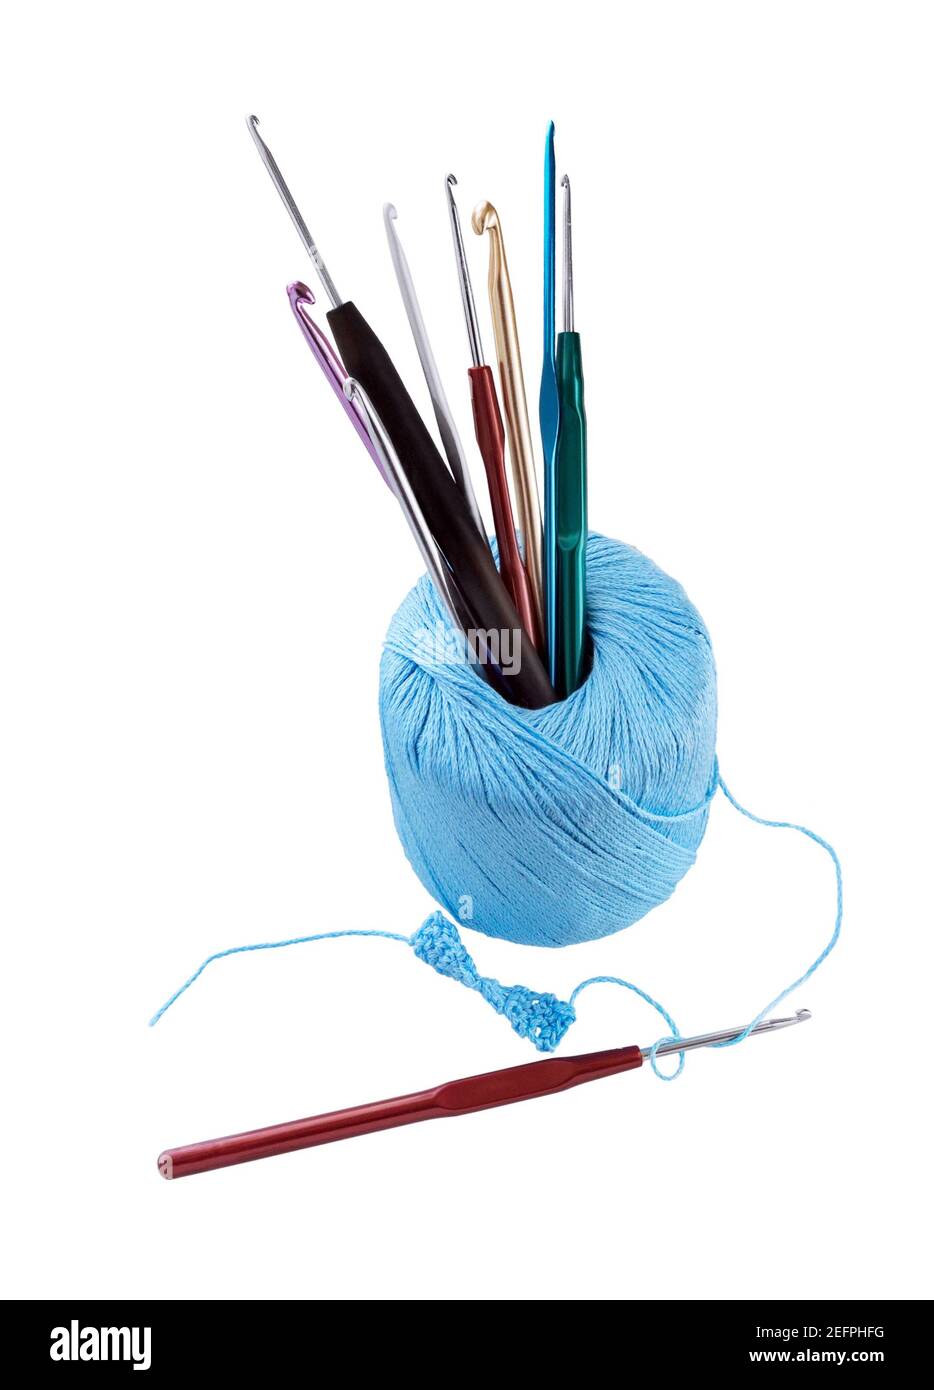 Hook crochet set. Ball of yarn with different sizes of crochet hooks  isolated on white background Stock Photo - Alamy